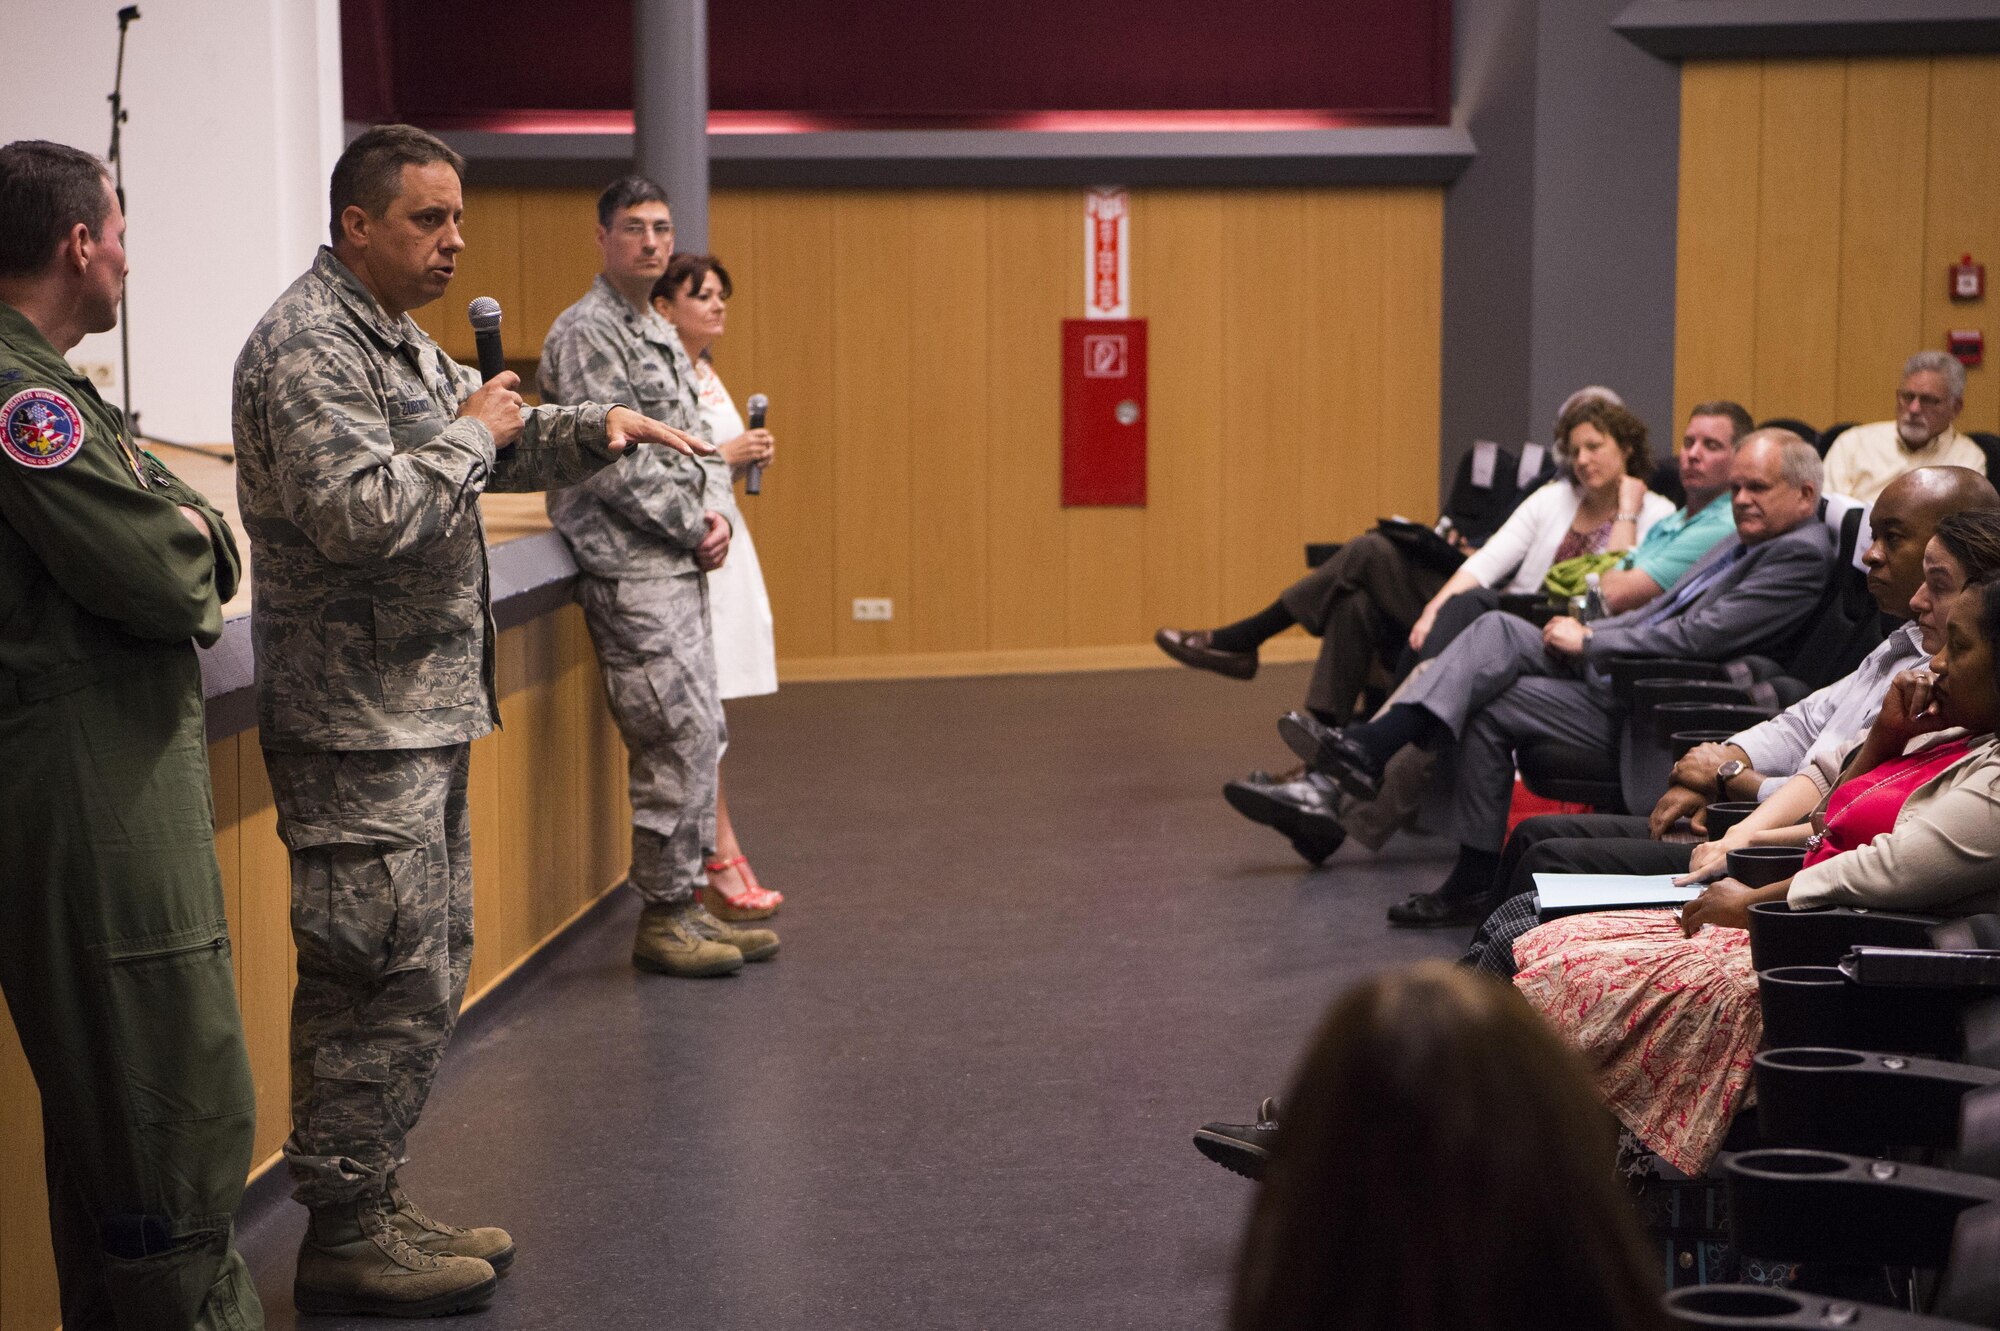 U.S. Air Force Col. Steven Zubowicz, 52nd Mission Support Group commander, addresses a town hall meeting at the base theater here, May 23, 2017. Base leadership used the meeting to answer questions, take suggestions and provide information about the Bitburg Middle-High School Barons’ move to Spangdahlem Air Base as the Spangdahlem Sentinels. (U.S. Air Force photo by Airman 1st Class Preston Cherry)